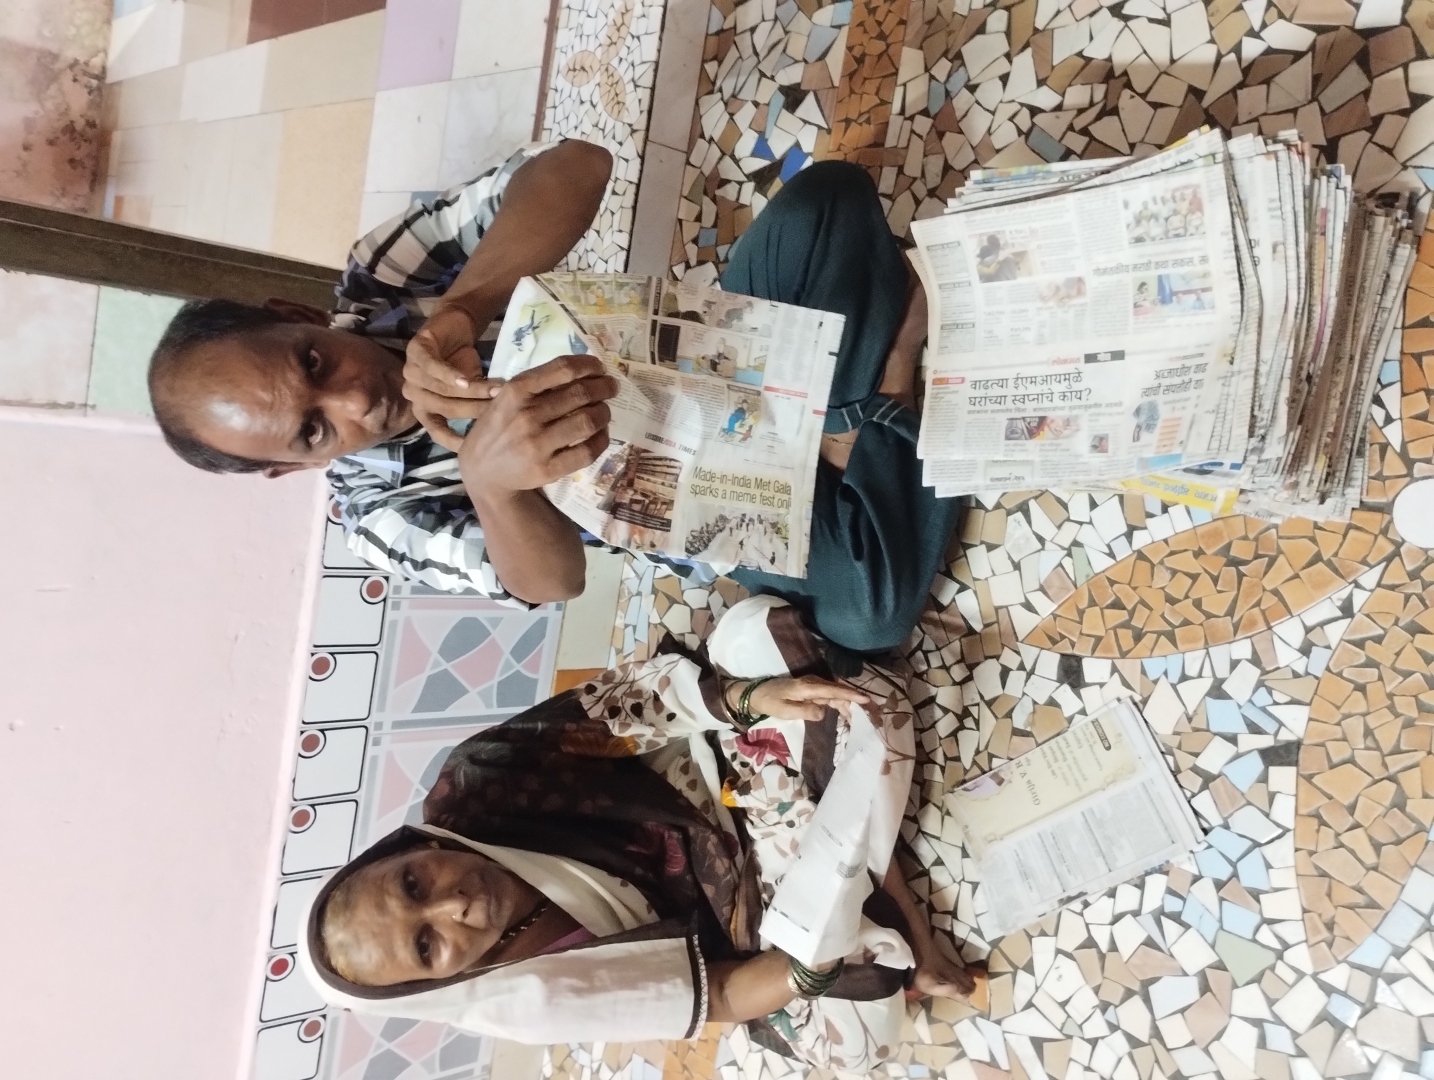 Crafting paper bags out of newspapers, Bashir makes a living